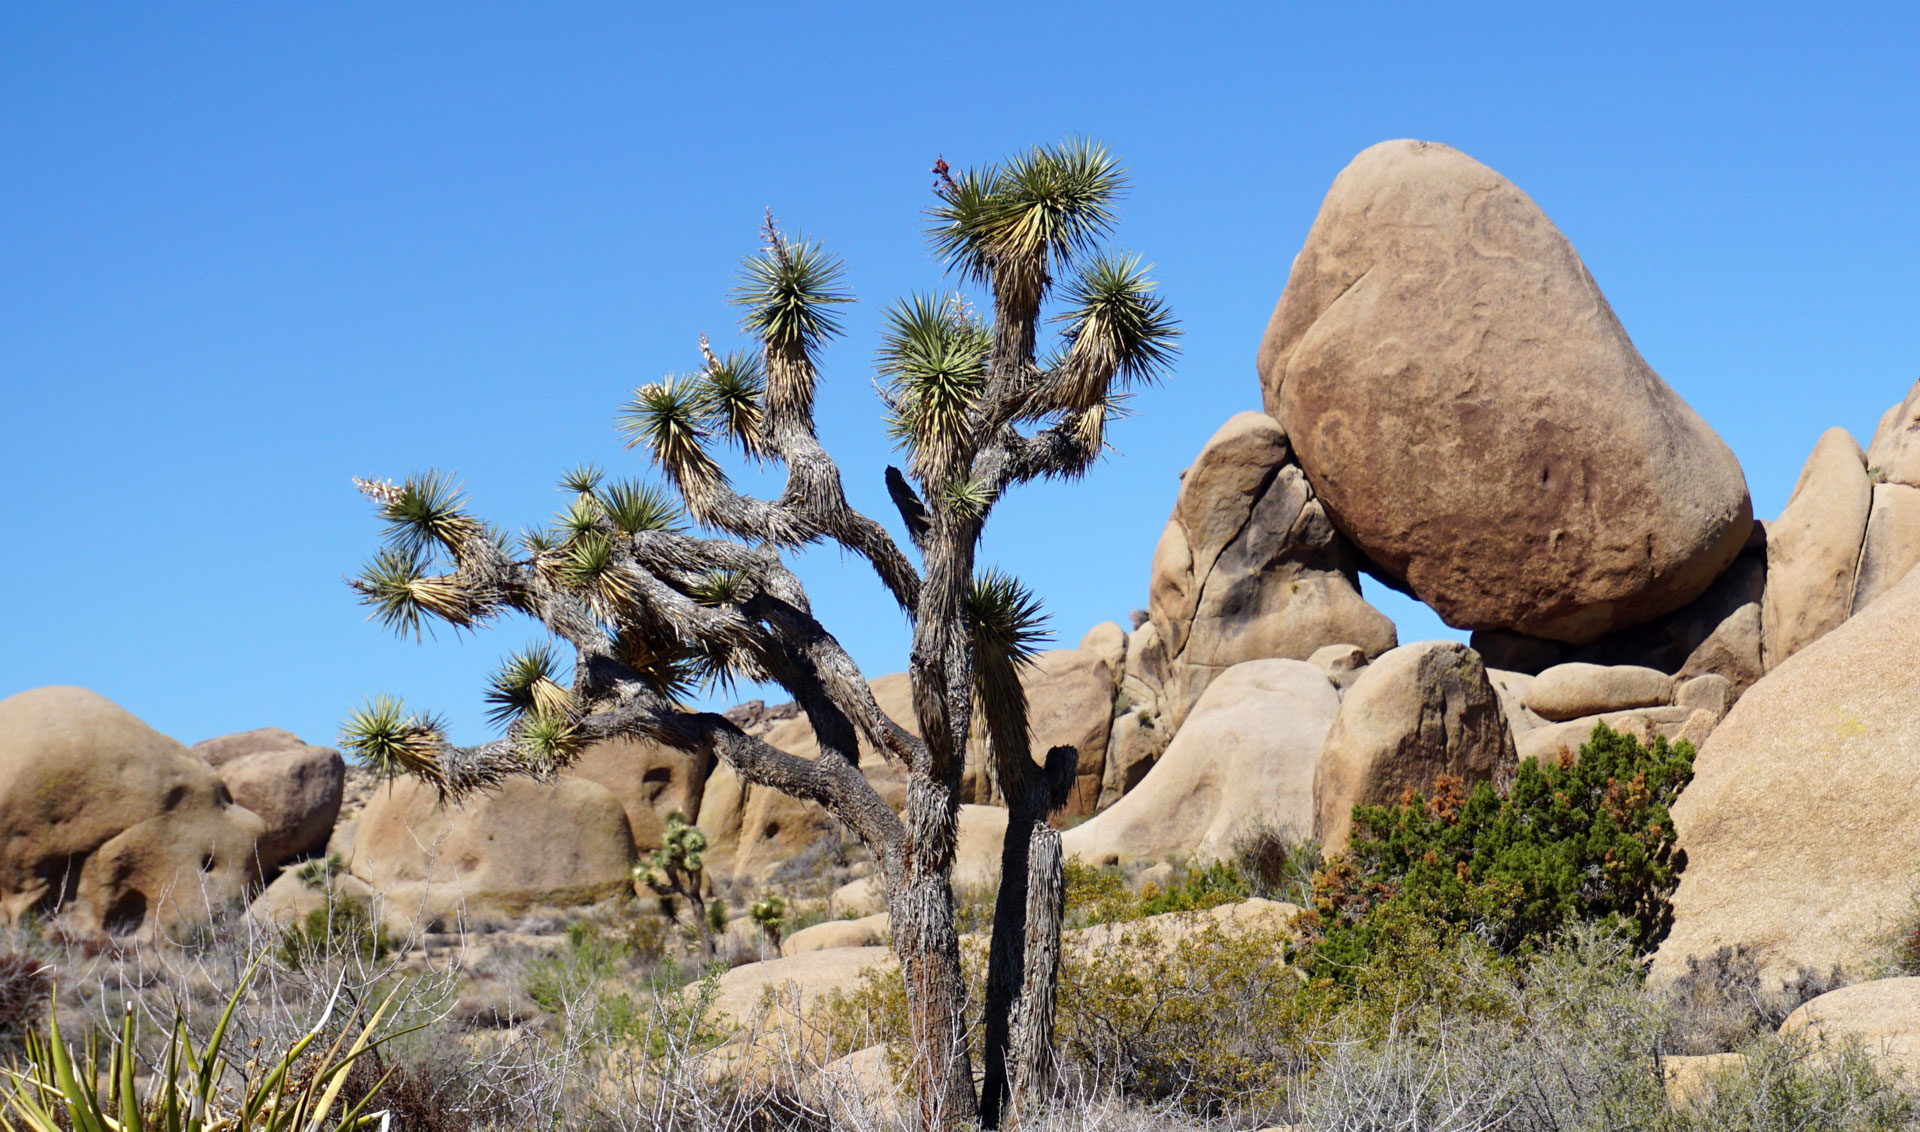 The National Park Service is looking at protecting areas where Joshua trees could survive.